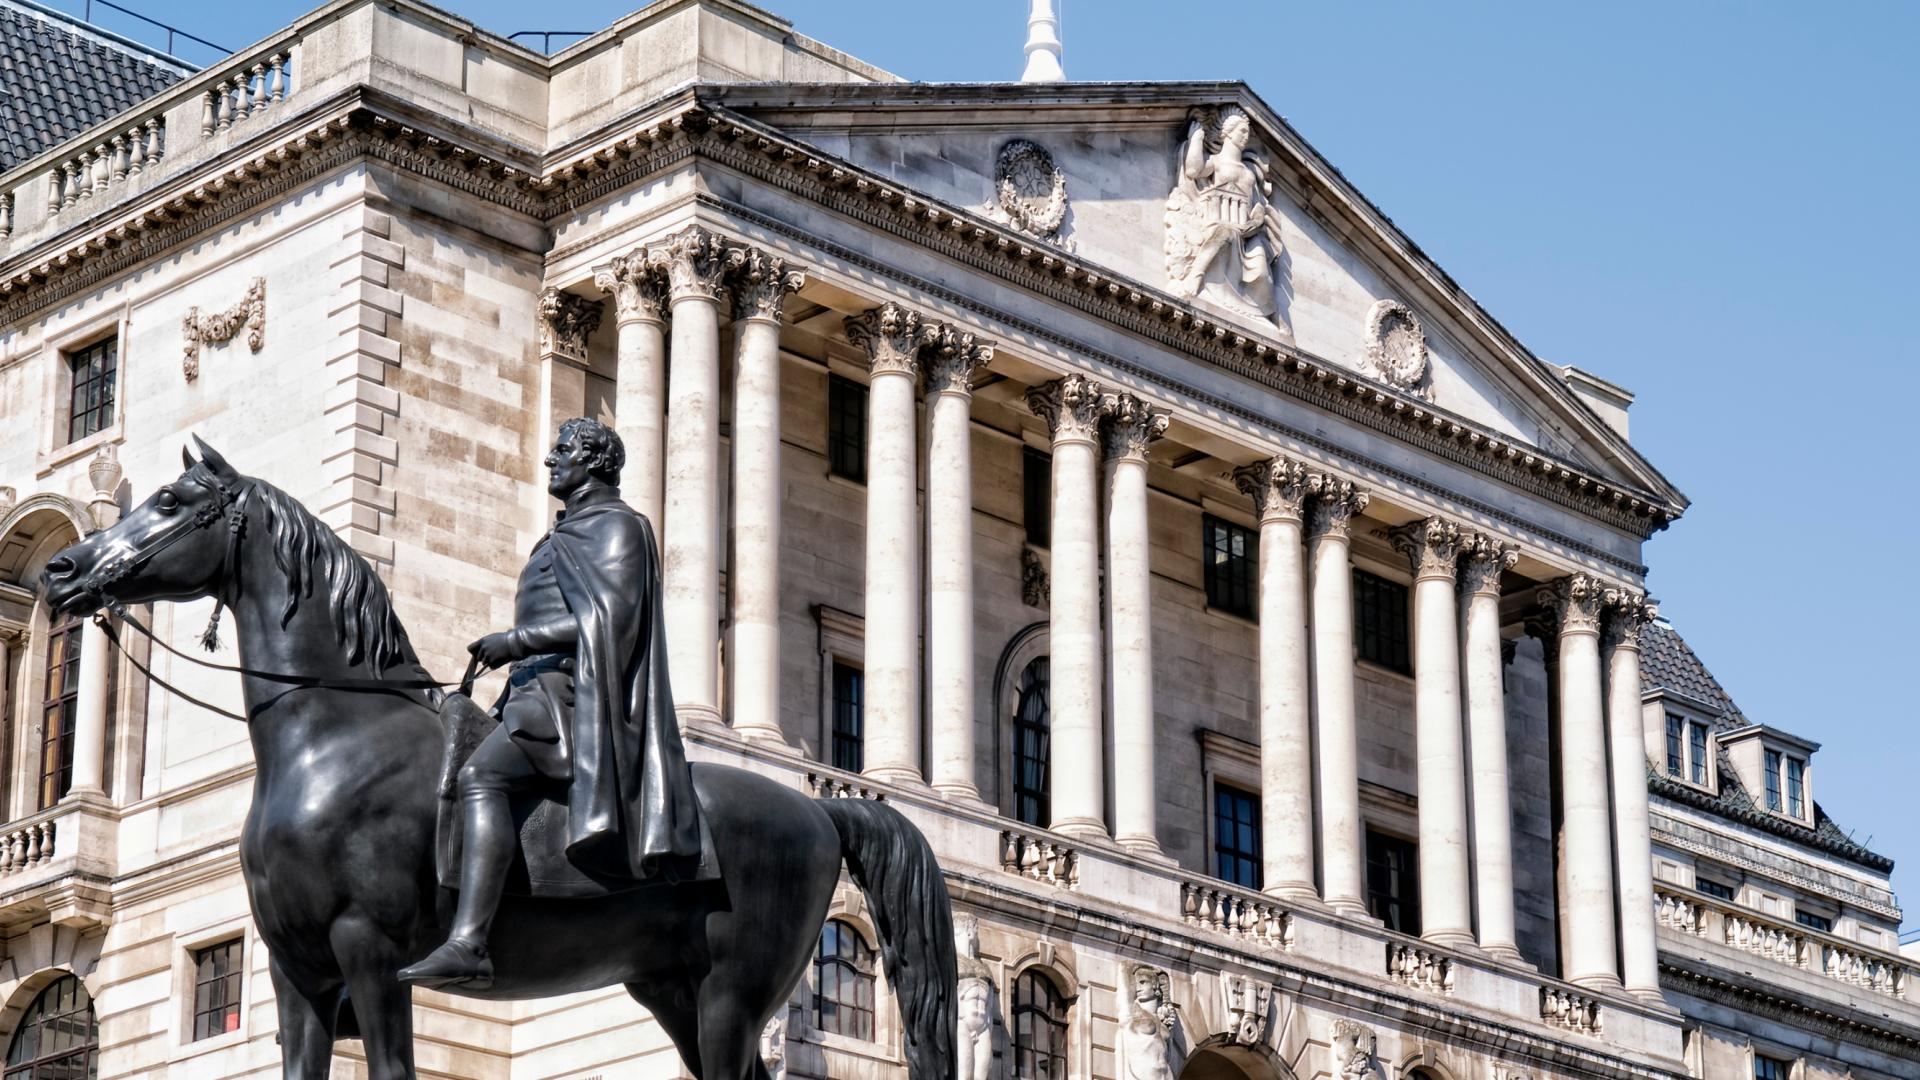 An image of the Bank of England